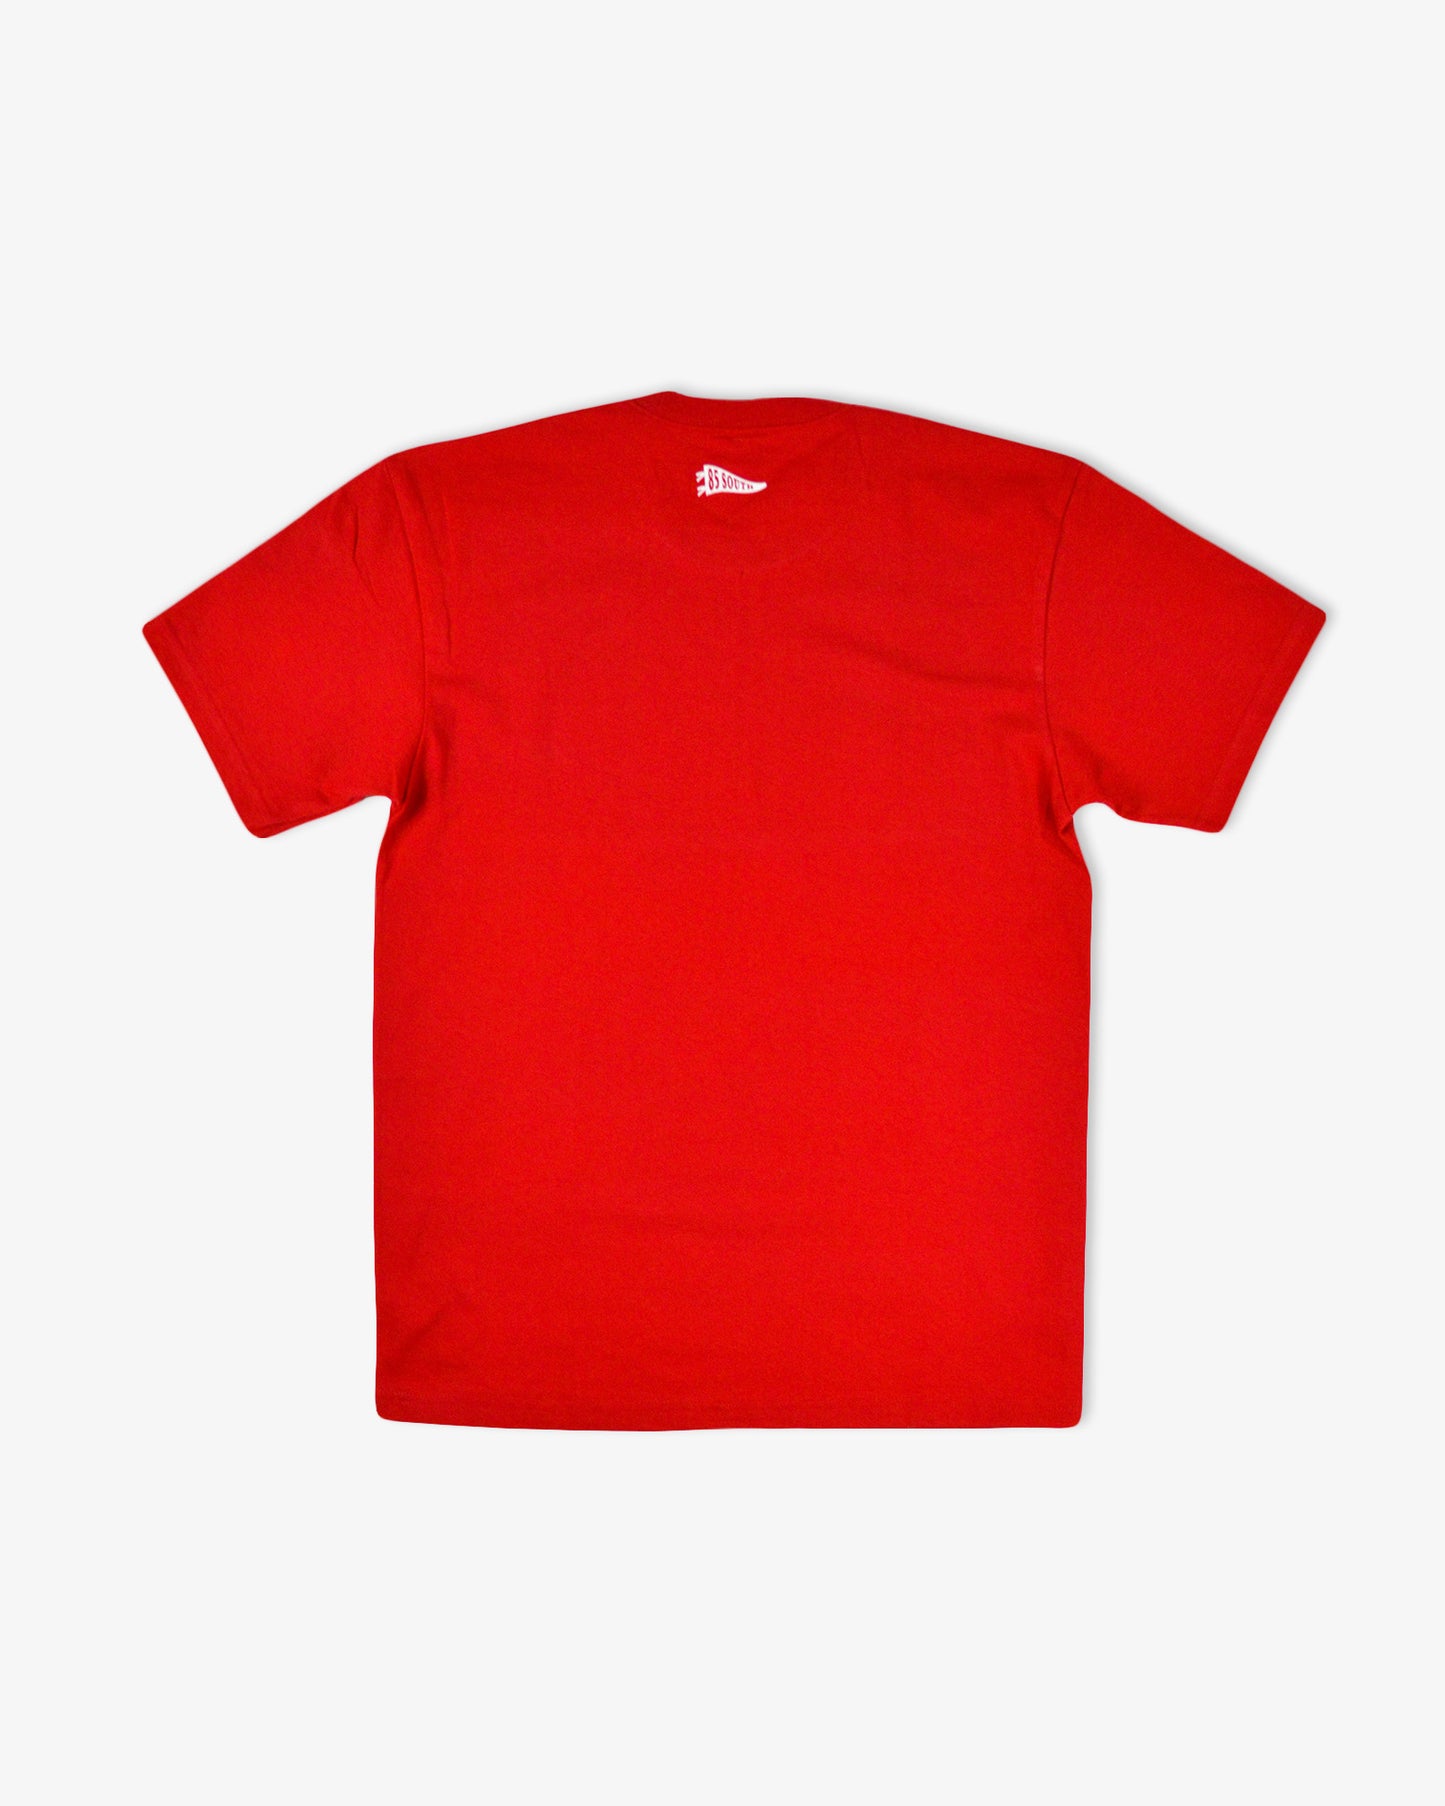 Evergreen South Script Tee - Red